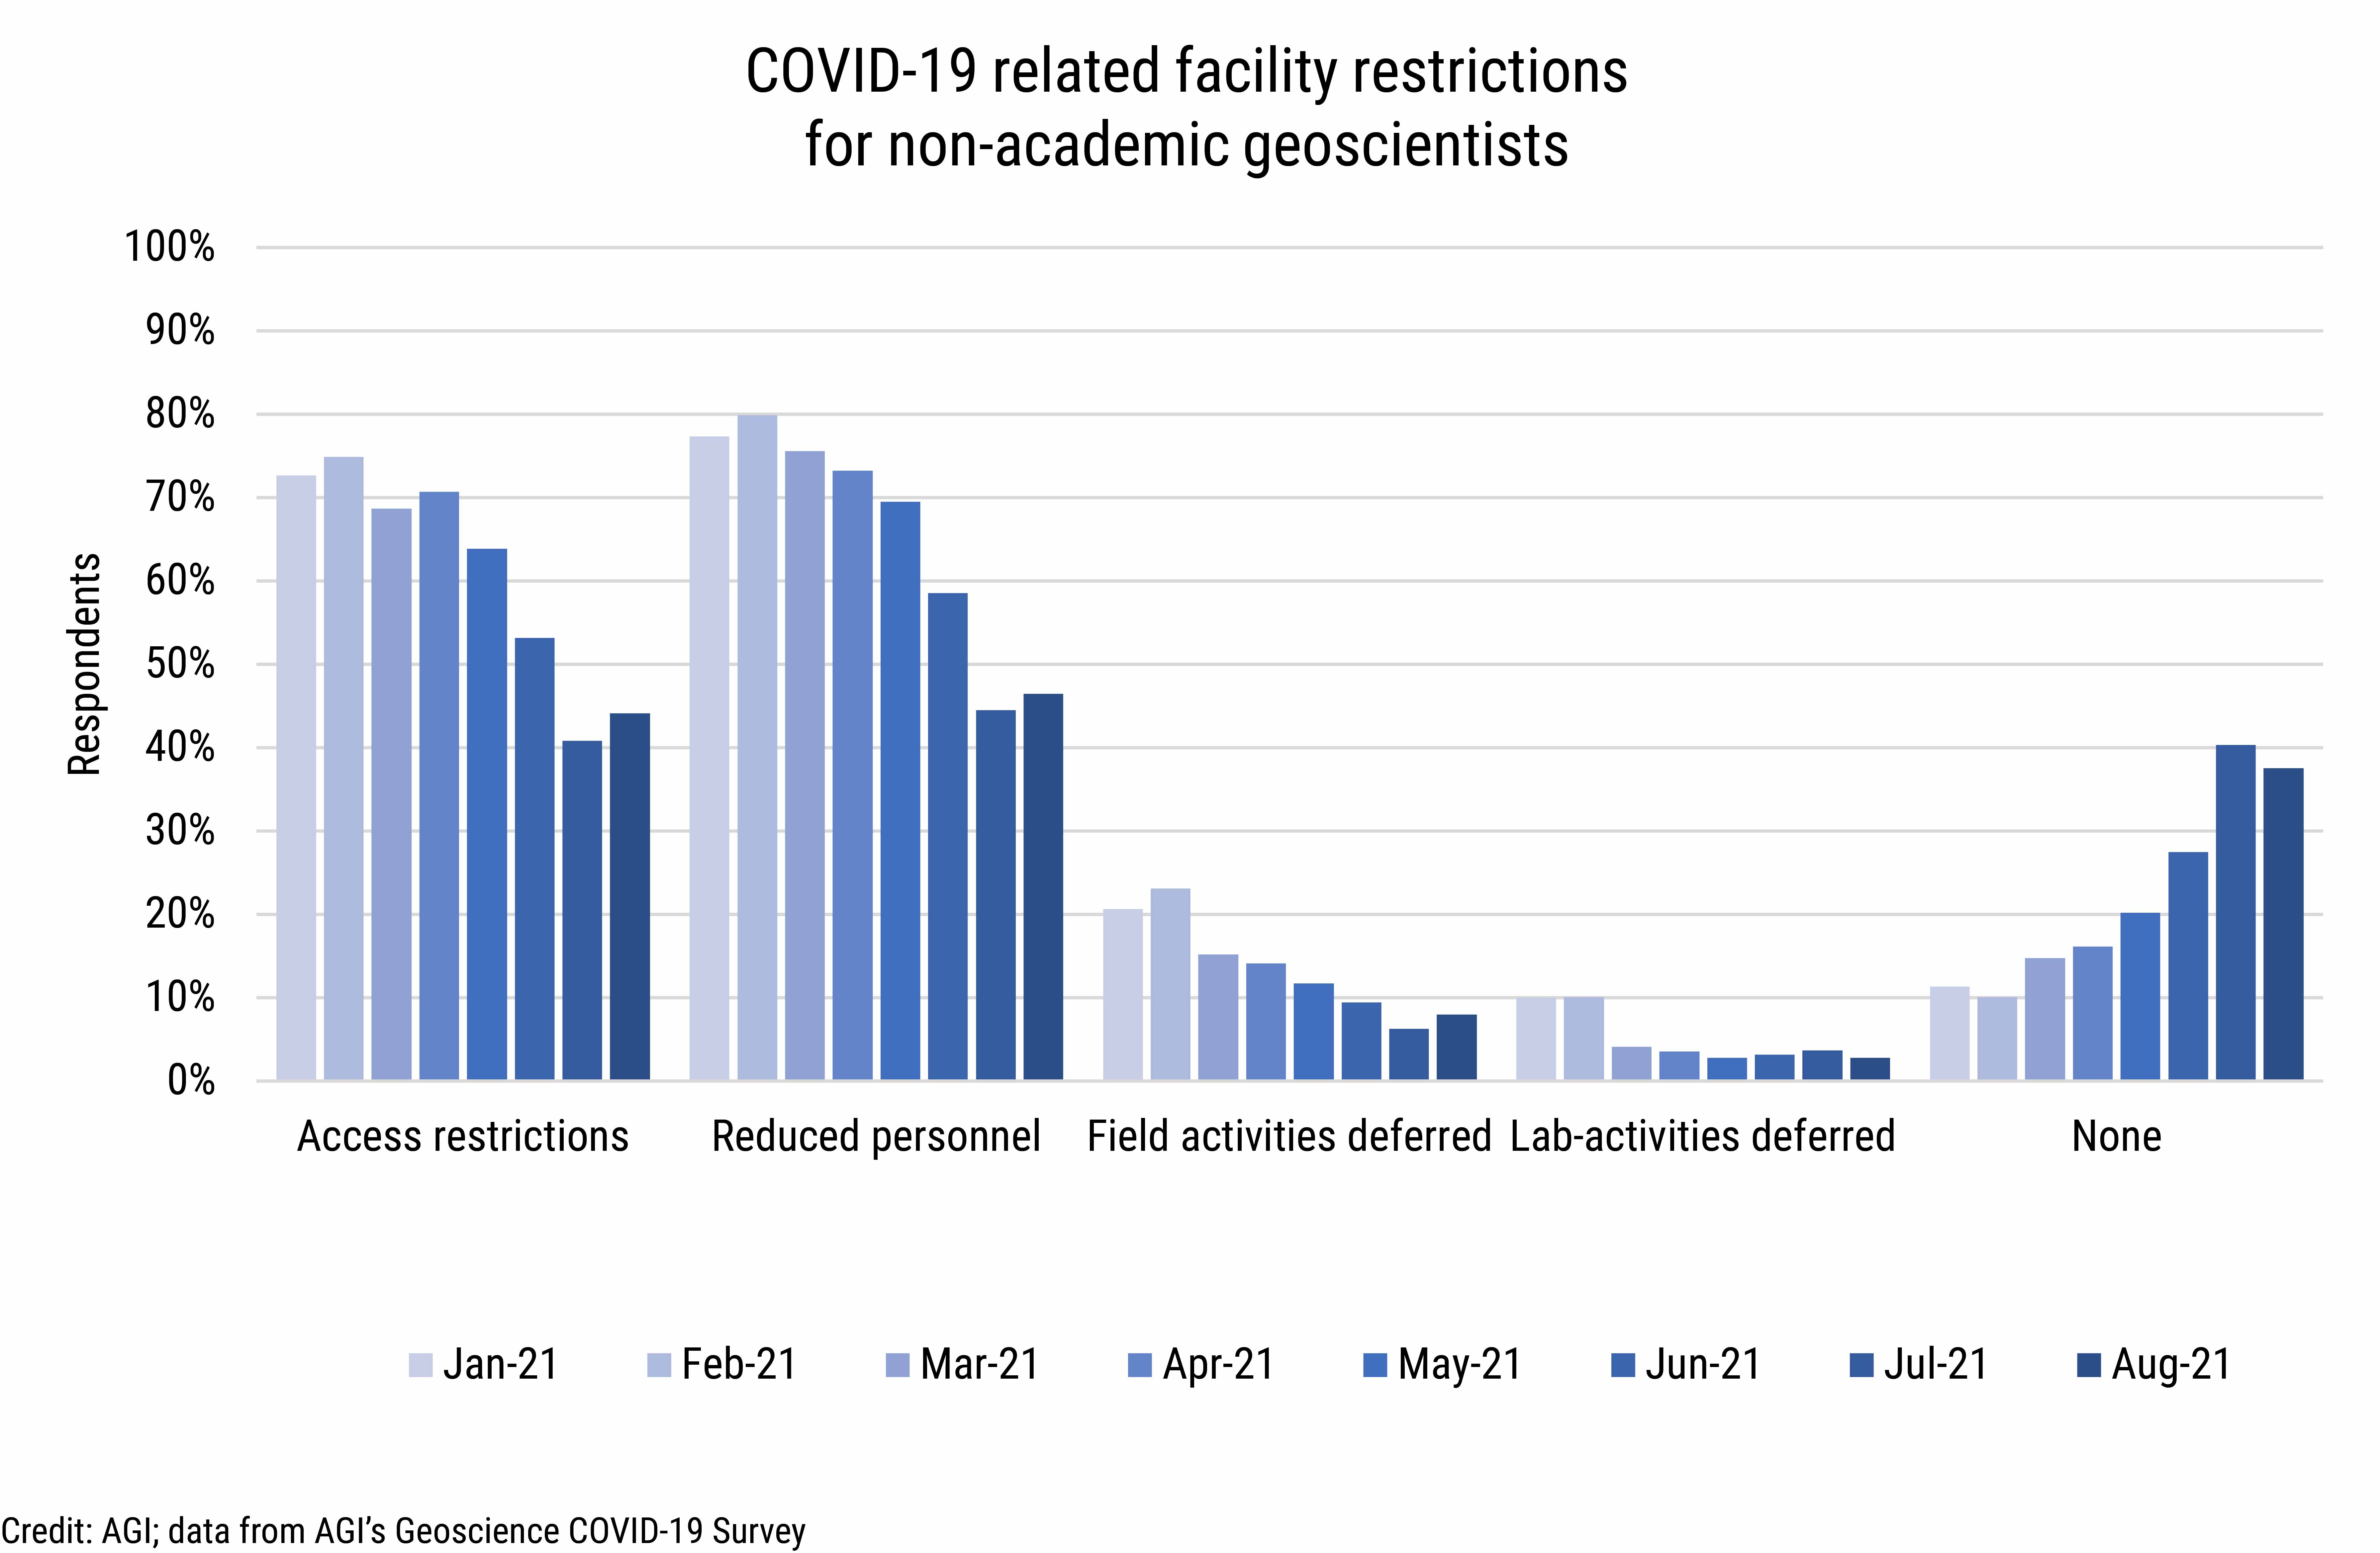 DB_2021-031 chart 02: COVID-19 related facility restrictions for non-academic gesocientists (Credit: AGI; data from AGI's Geoscience COVID-19 Survey)